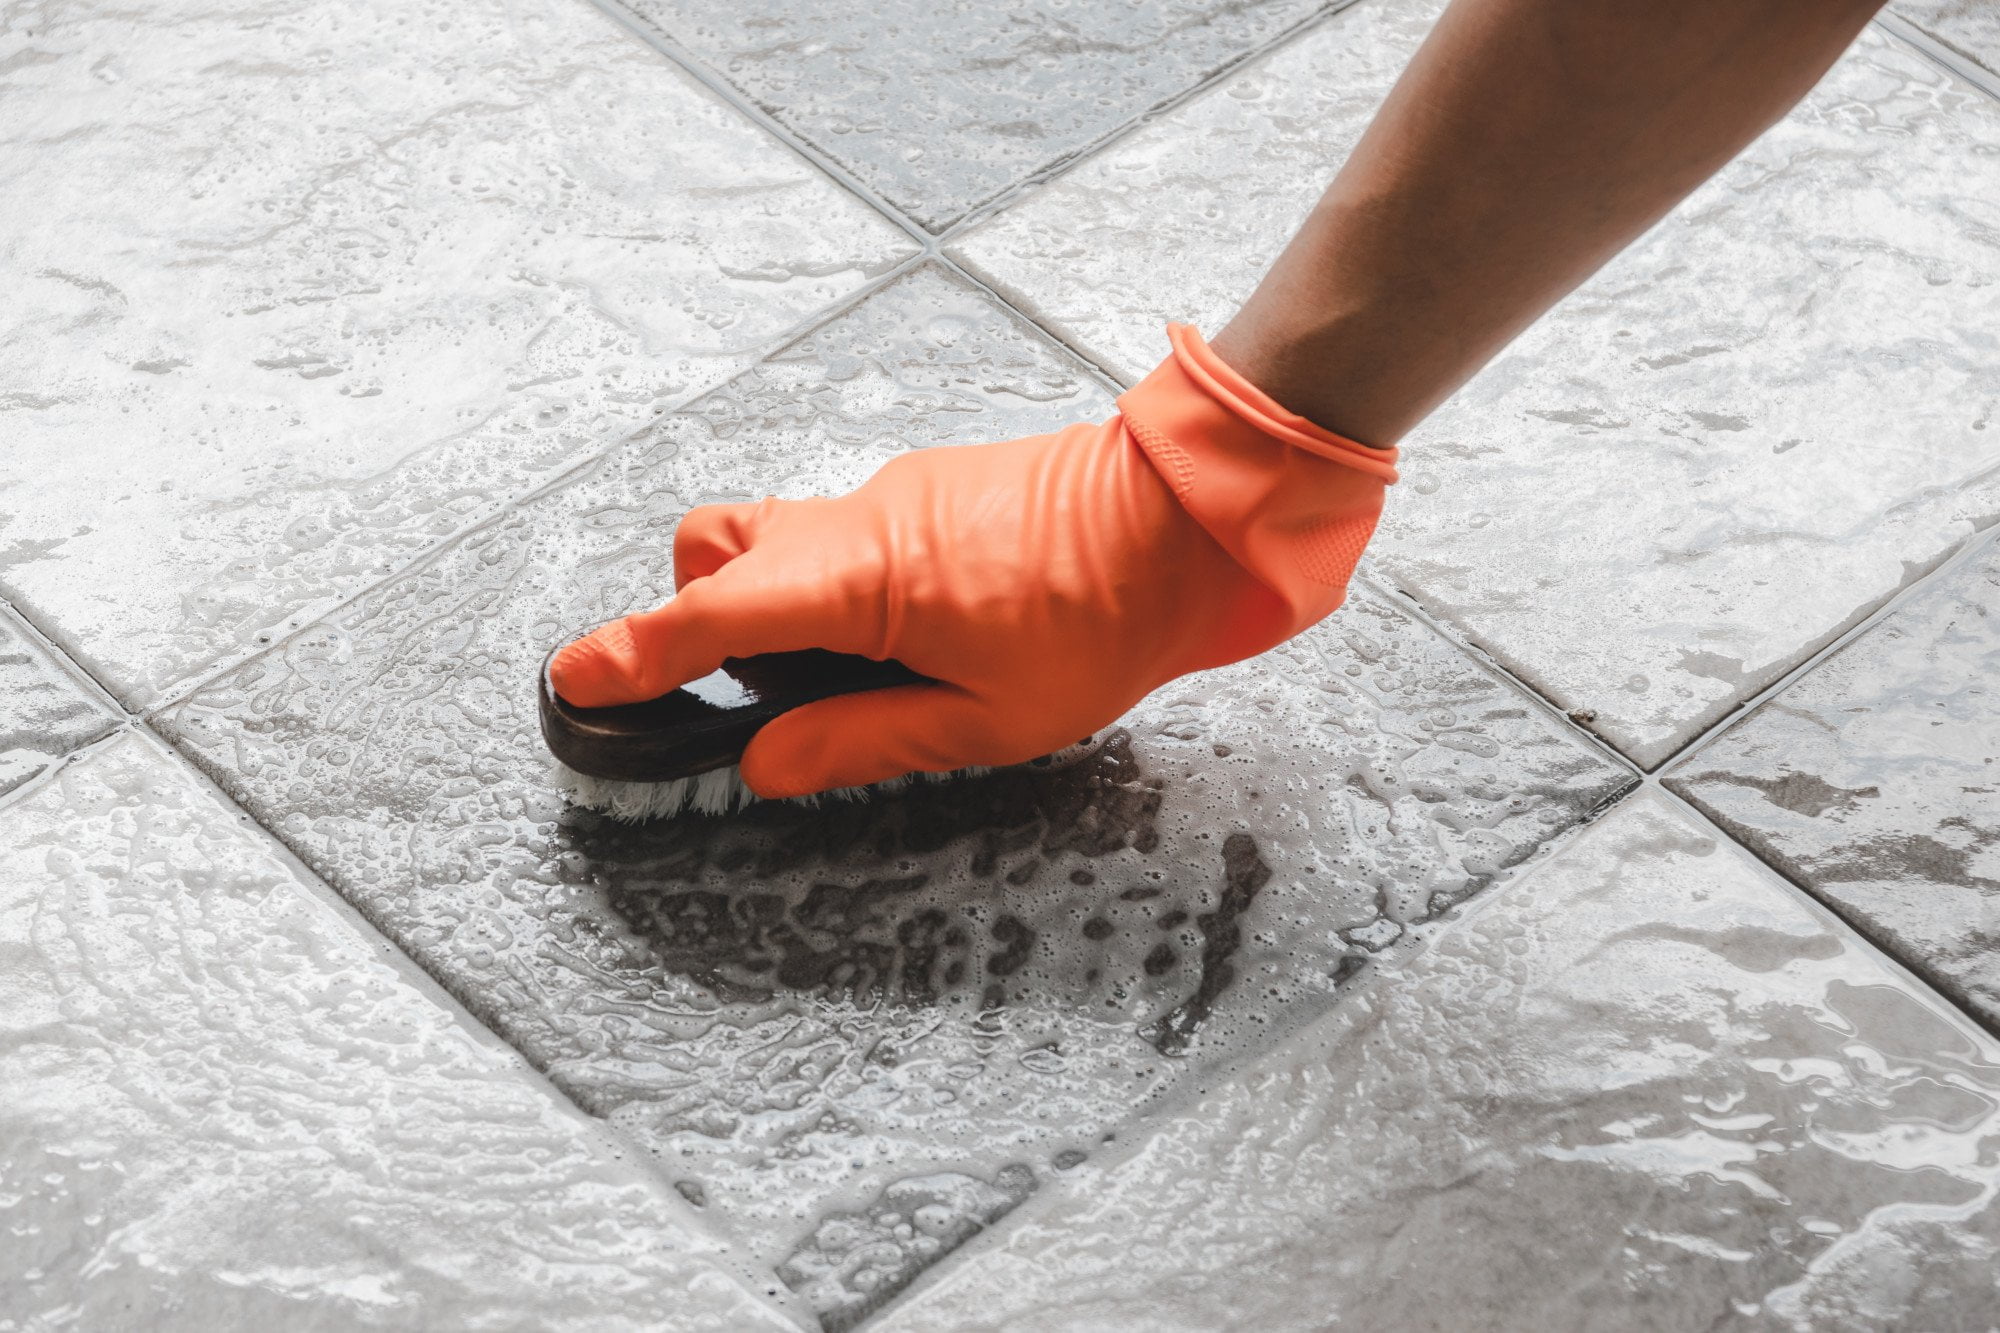 There are countless advantages of keeping your bathroom spotless. Here are some tips on how to clean shower tiles without scrubbing.